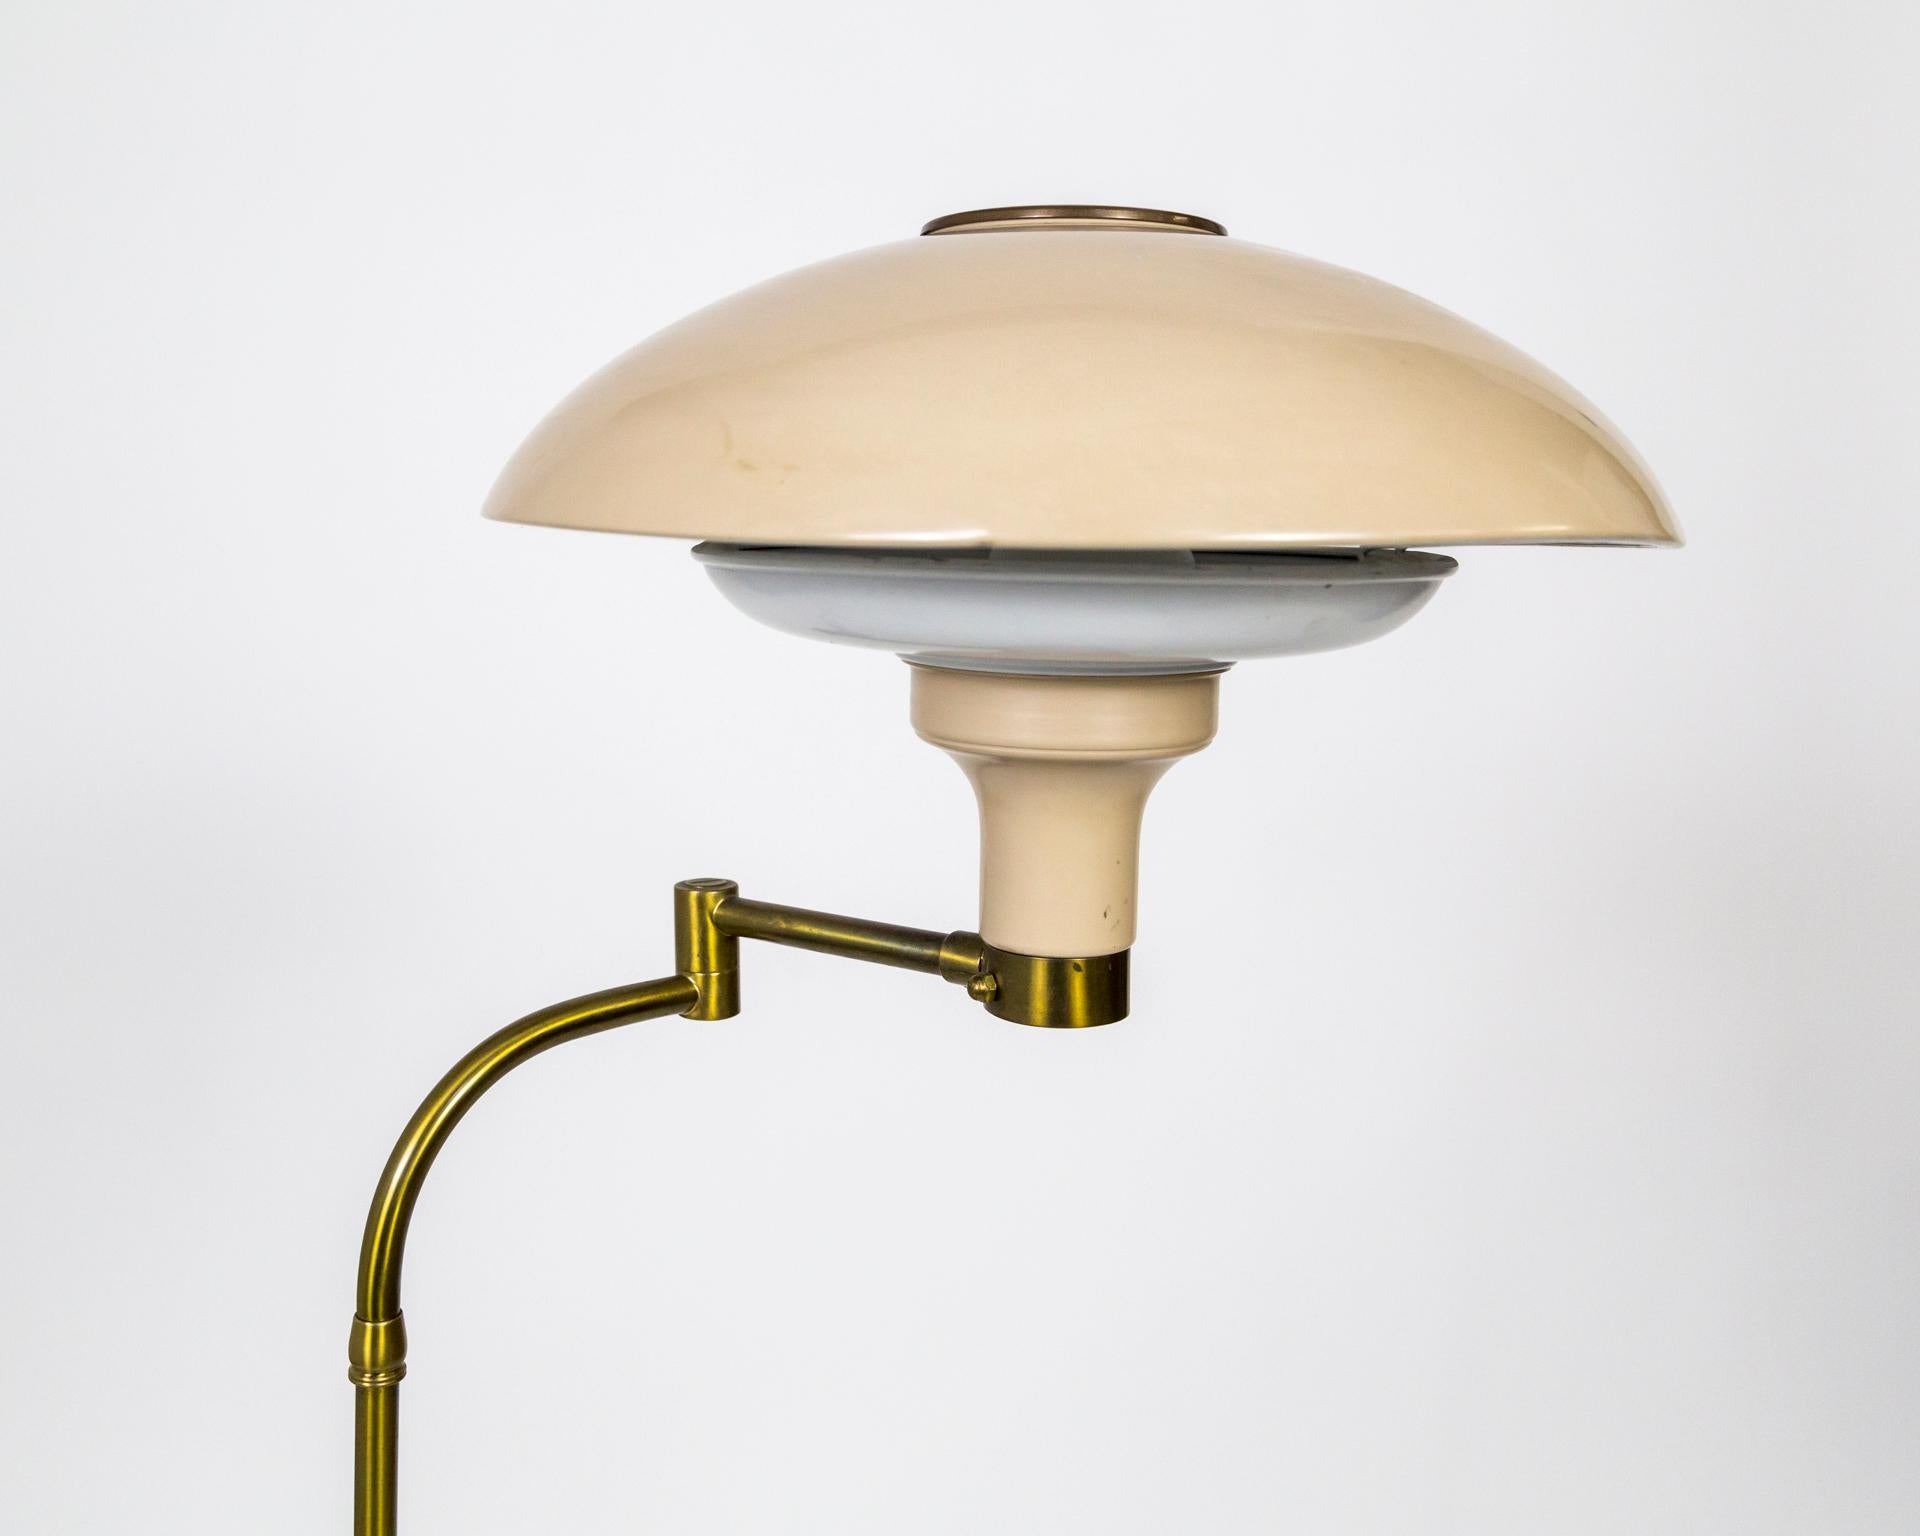 Metal Dazor 1950s Flying Saucer Floor Lamp in Brass & Buff Lacquer